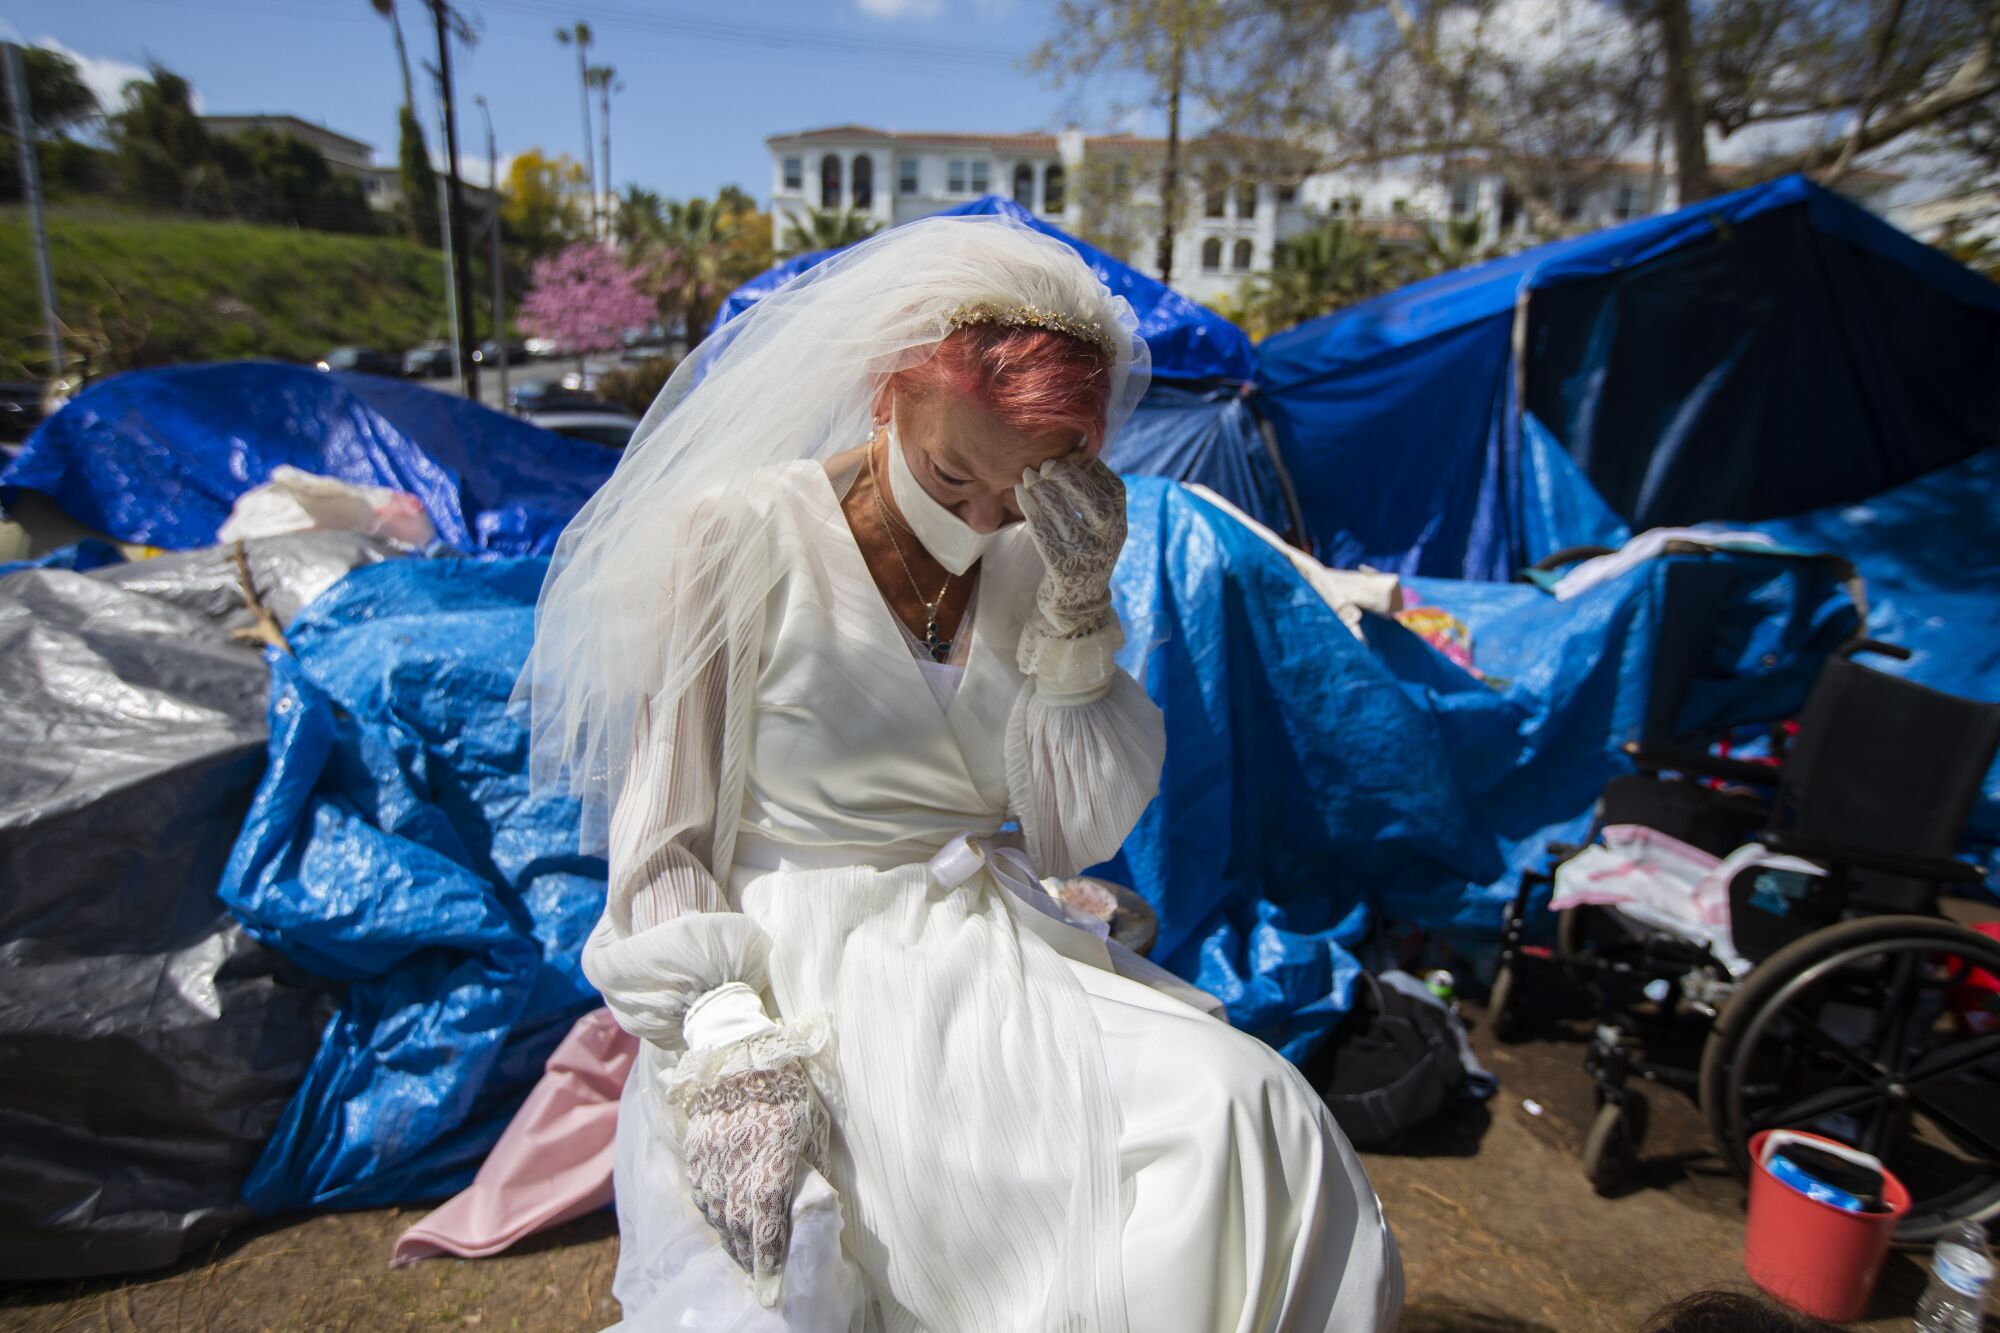 A woman in a wedding dress sits among tents in a park.